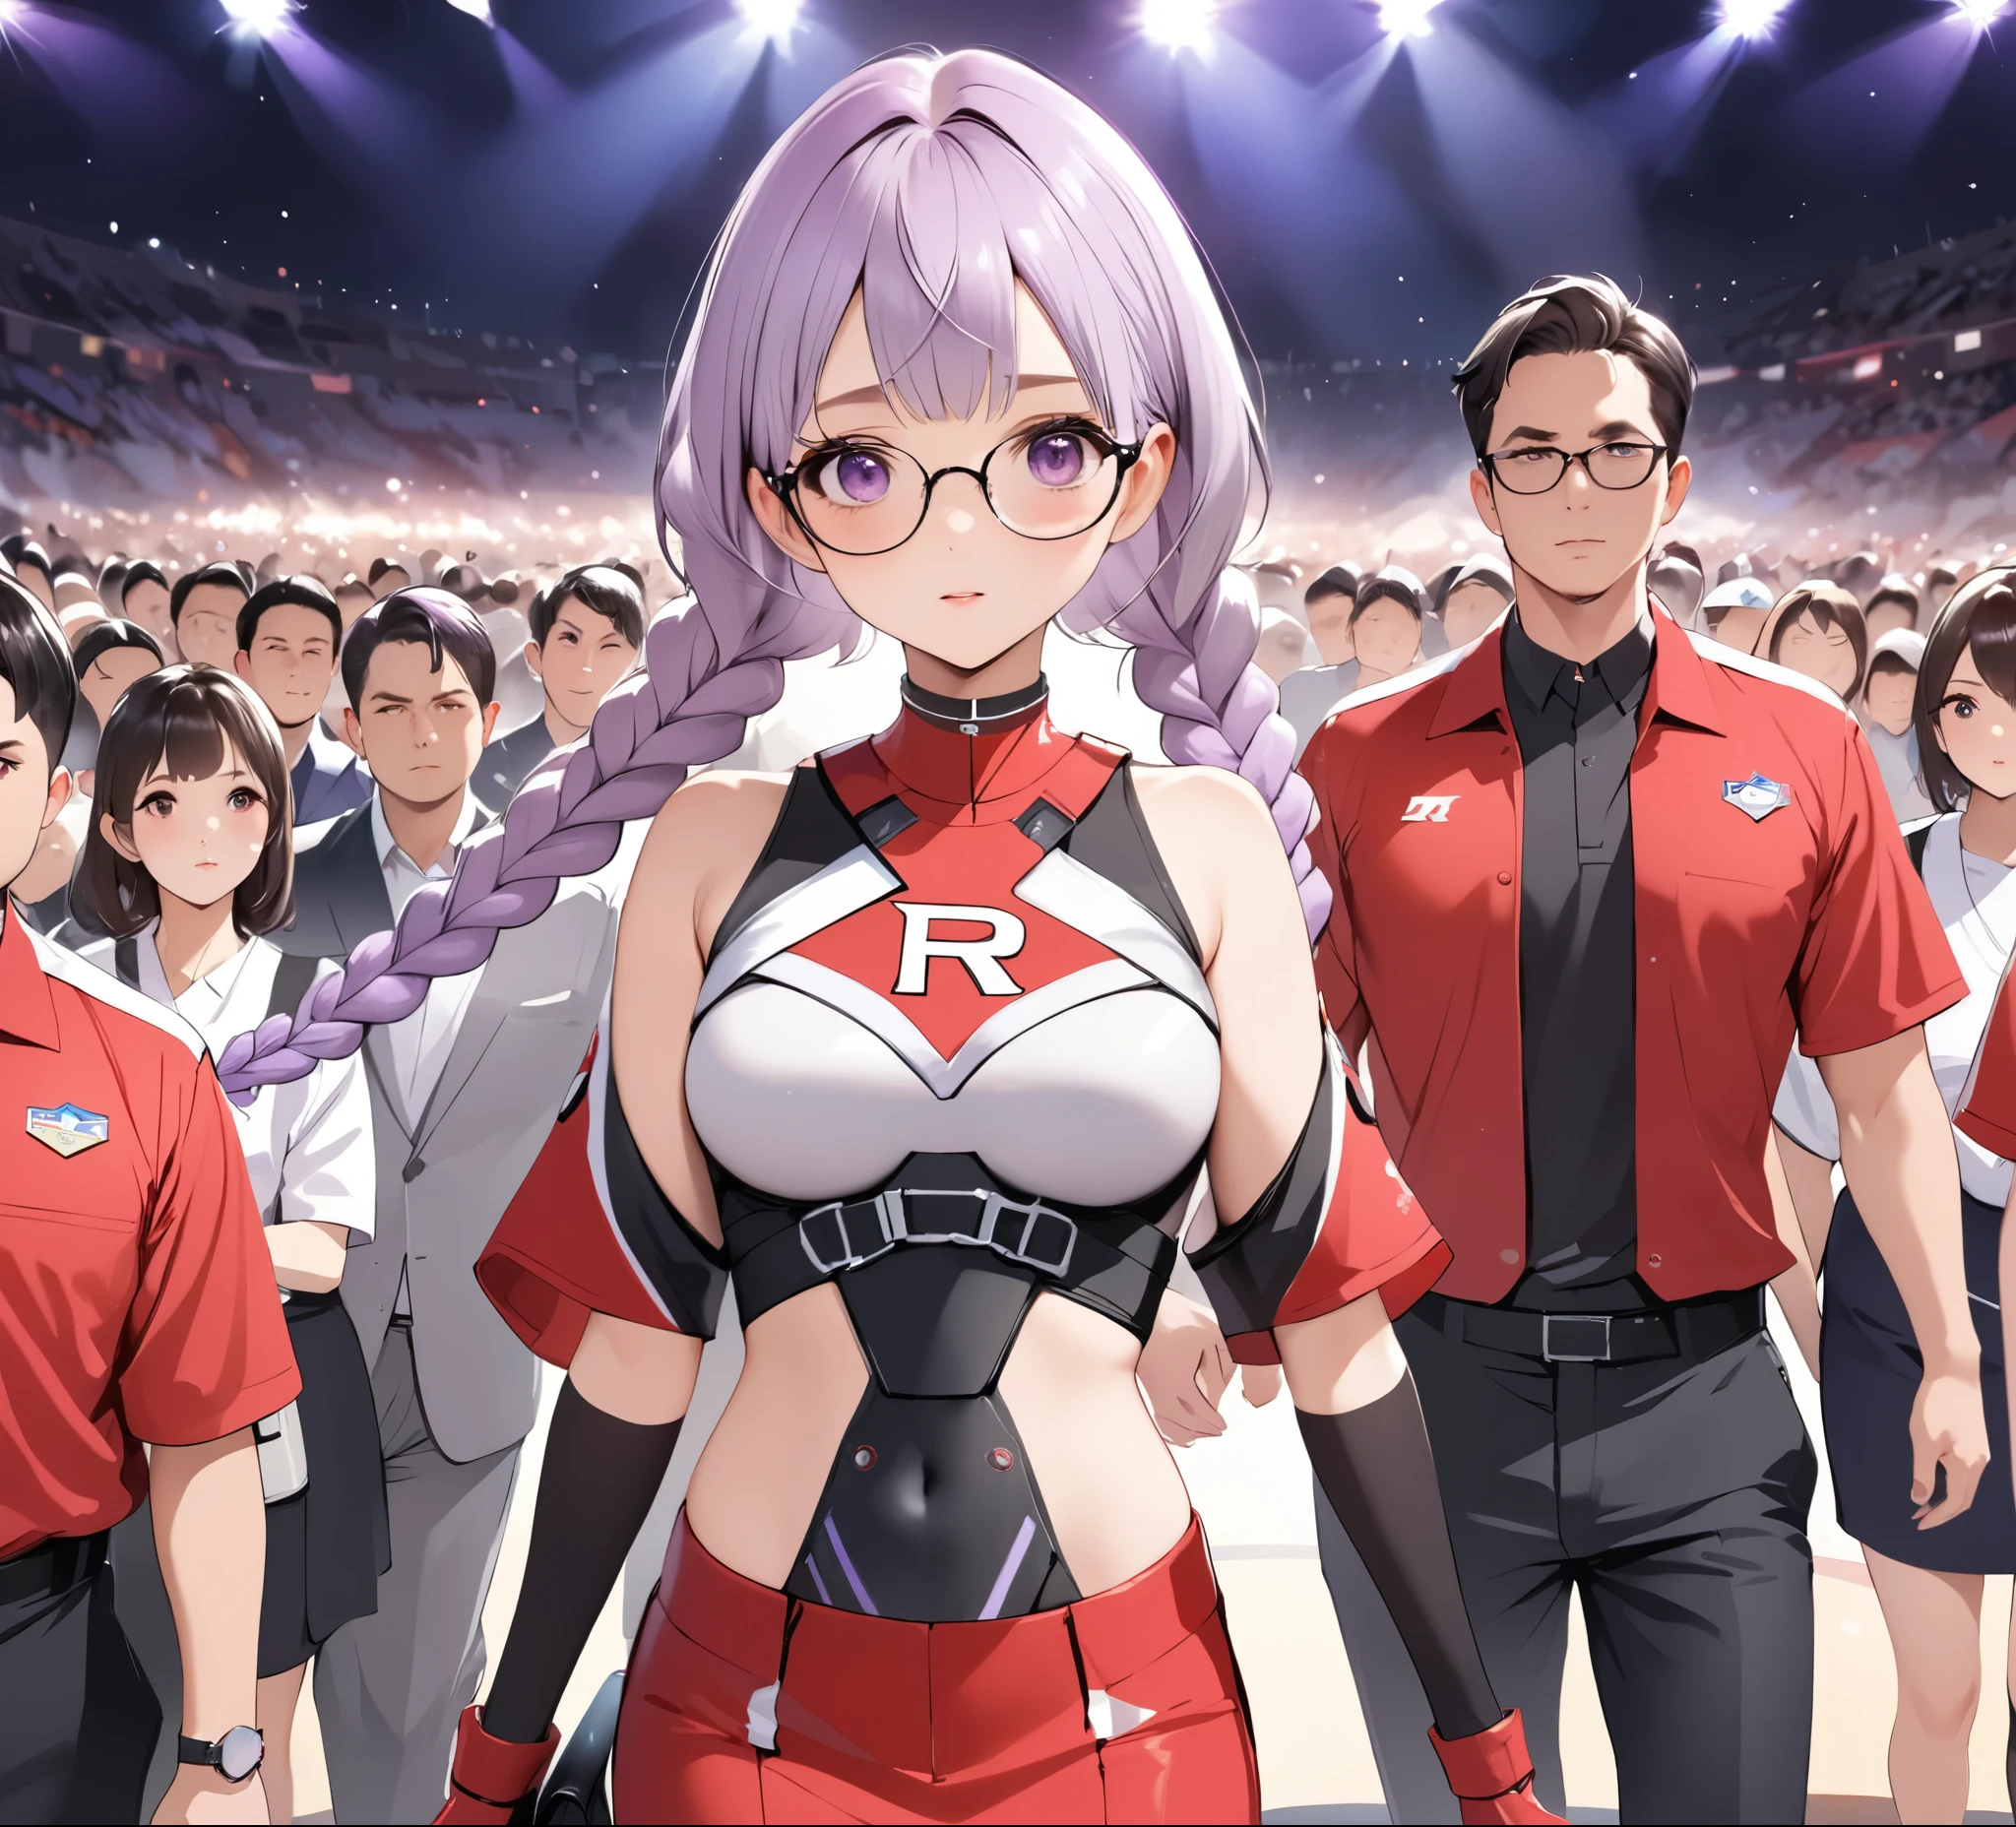 best quality, (masterpiece:1.2), illustration, absurd, Japanese cartoons,
(A man，A woman(Purple and White Gradient Double Braids)), 
Glasses, Rockets,Rockets uniform, Red letter R, White short top,Black elbow gloves
 (looking at the audience)